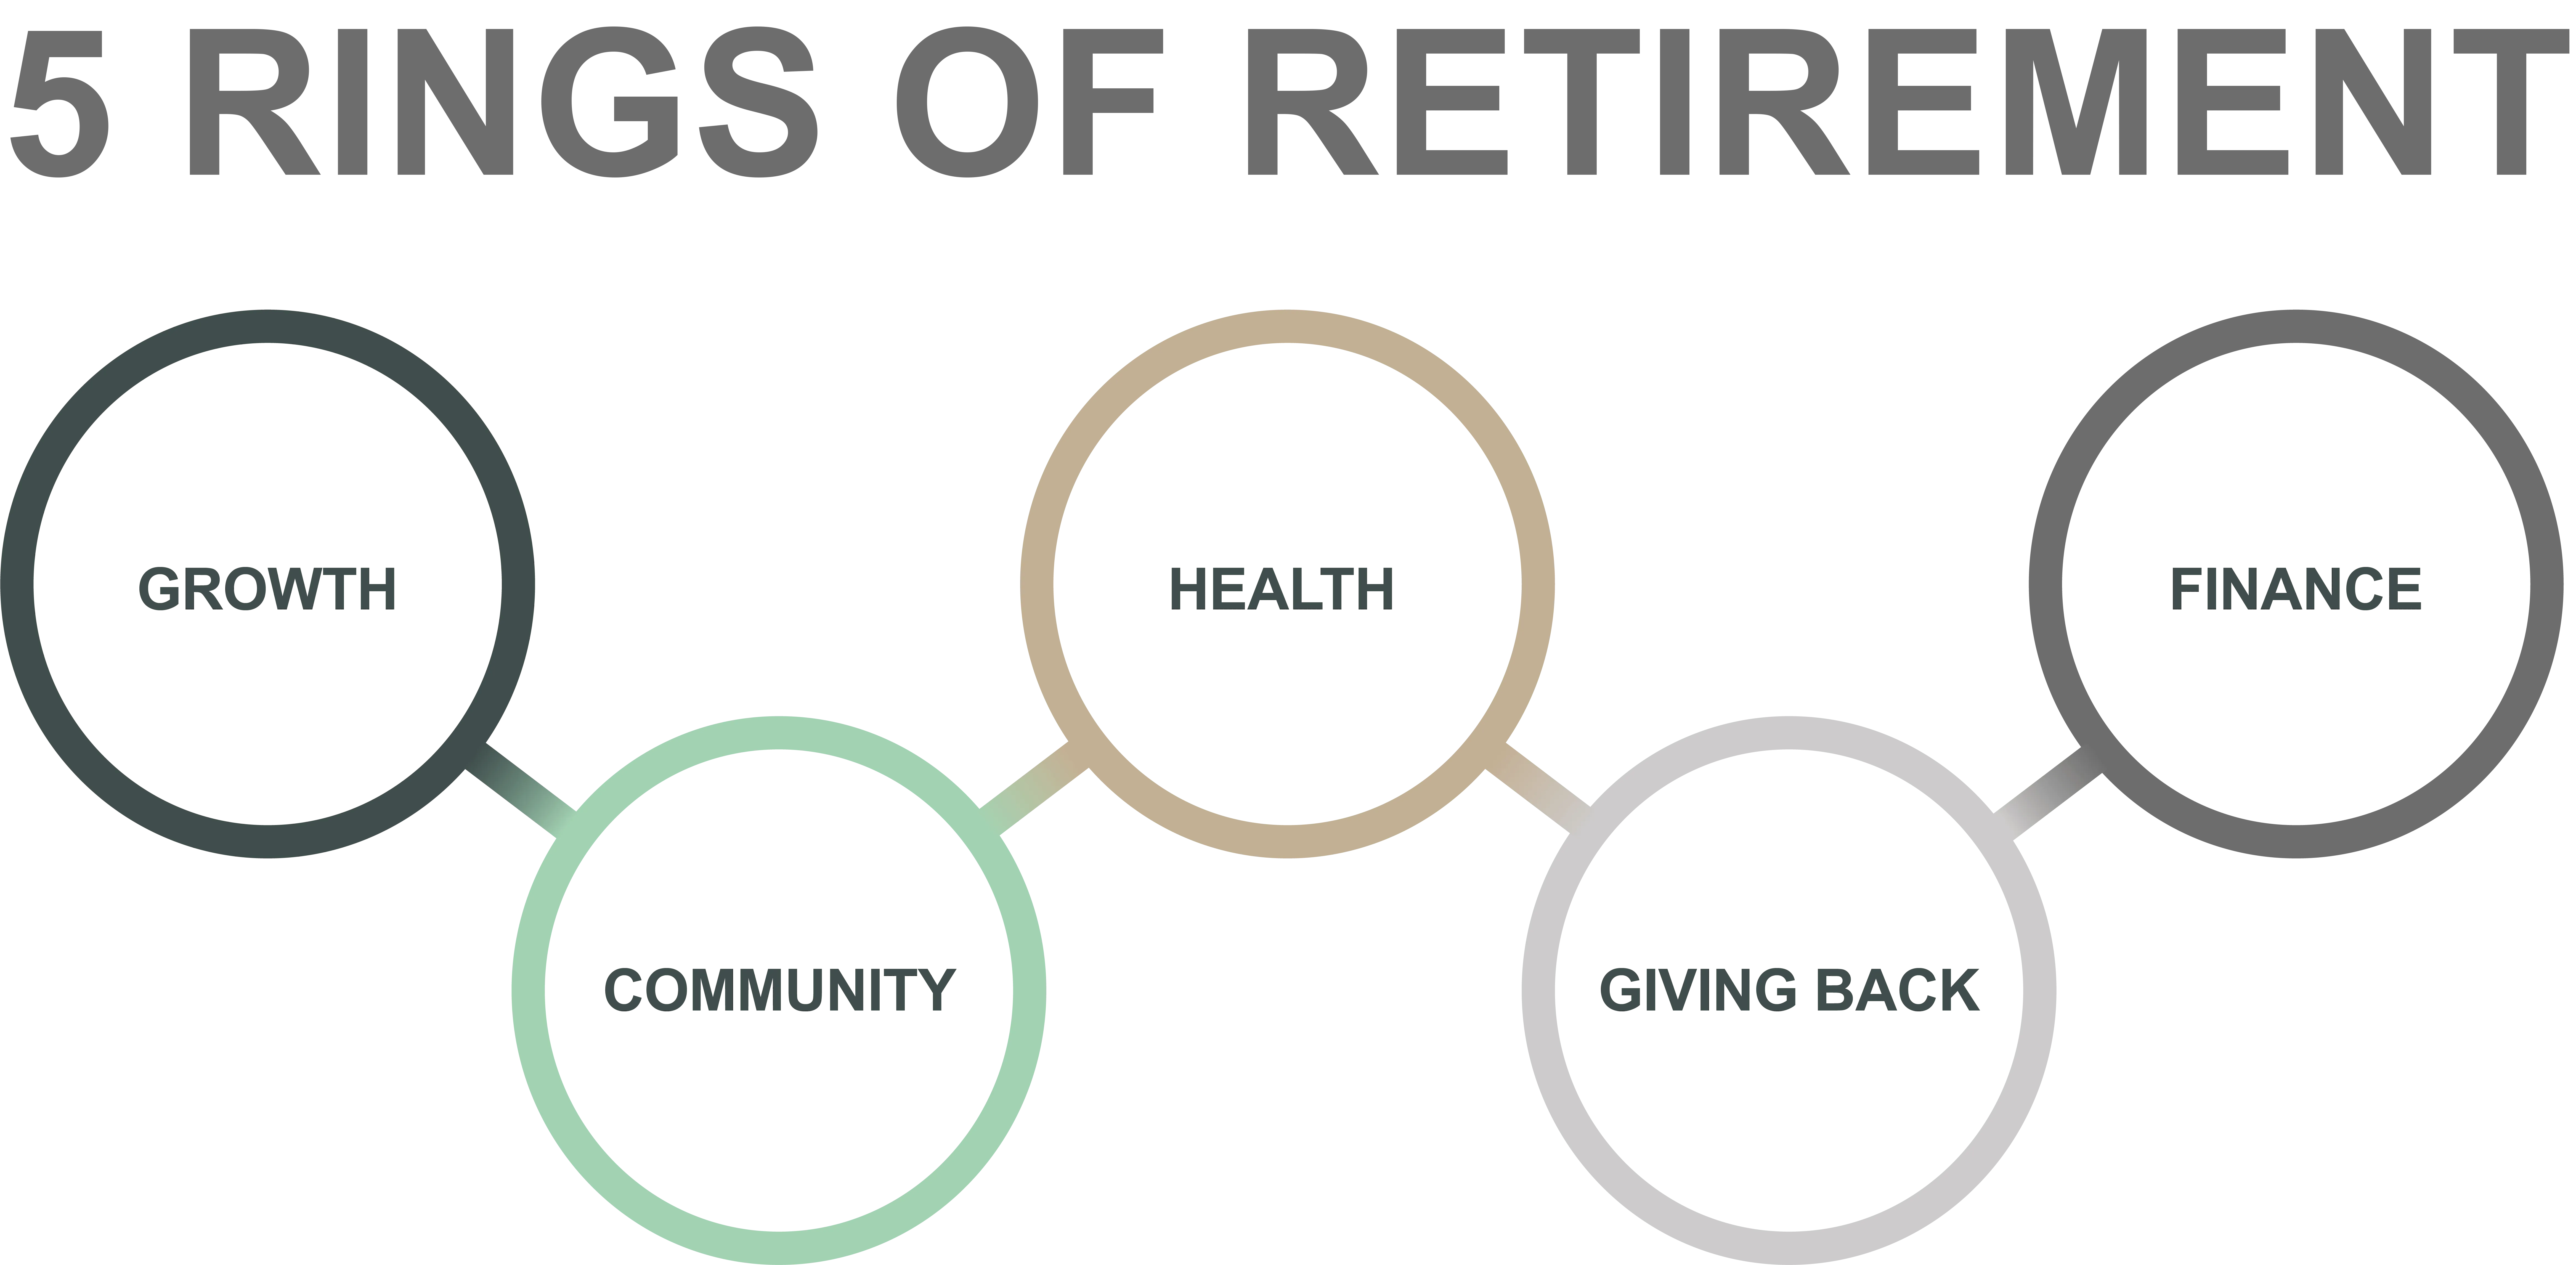 the five rings of retirement - growth, community, health, giving back, and finance